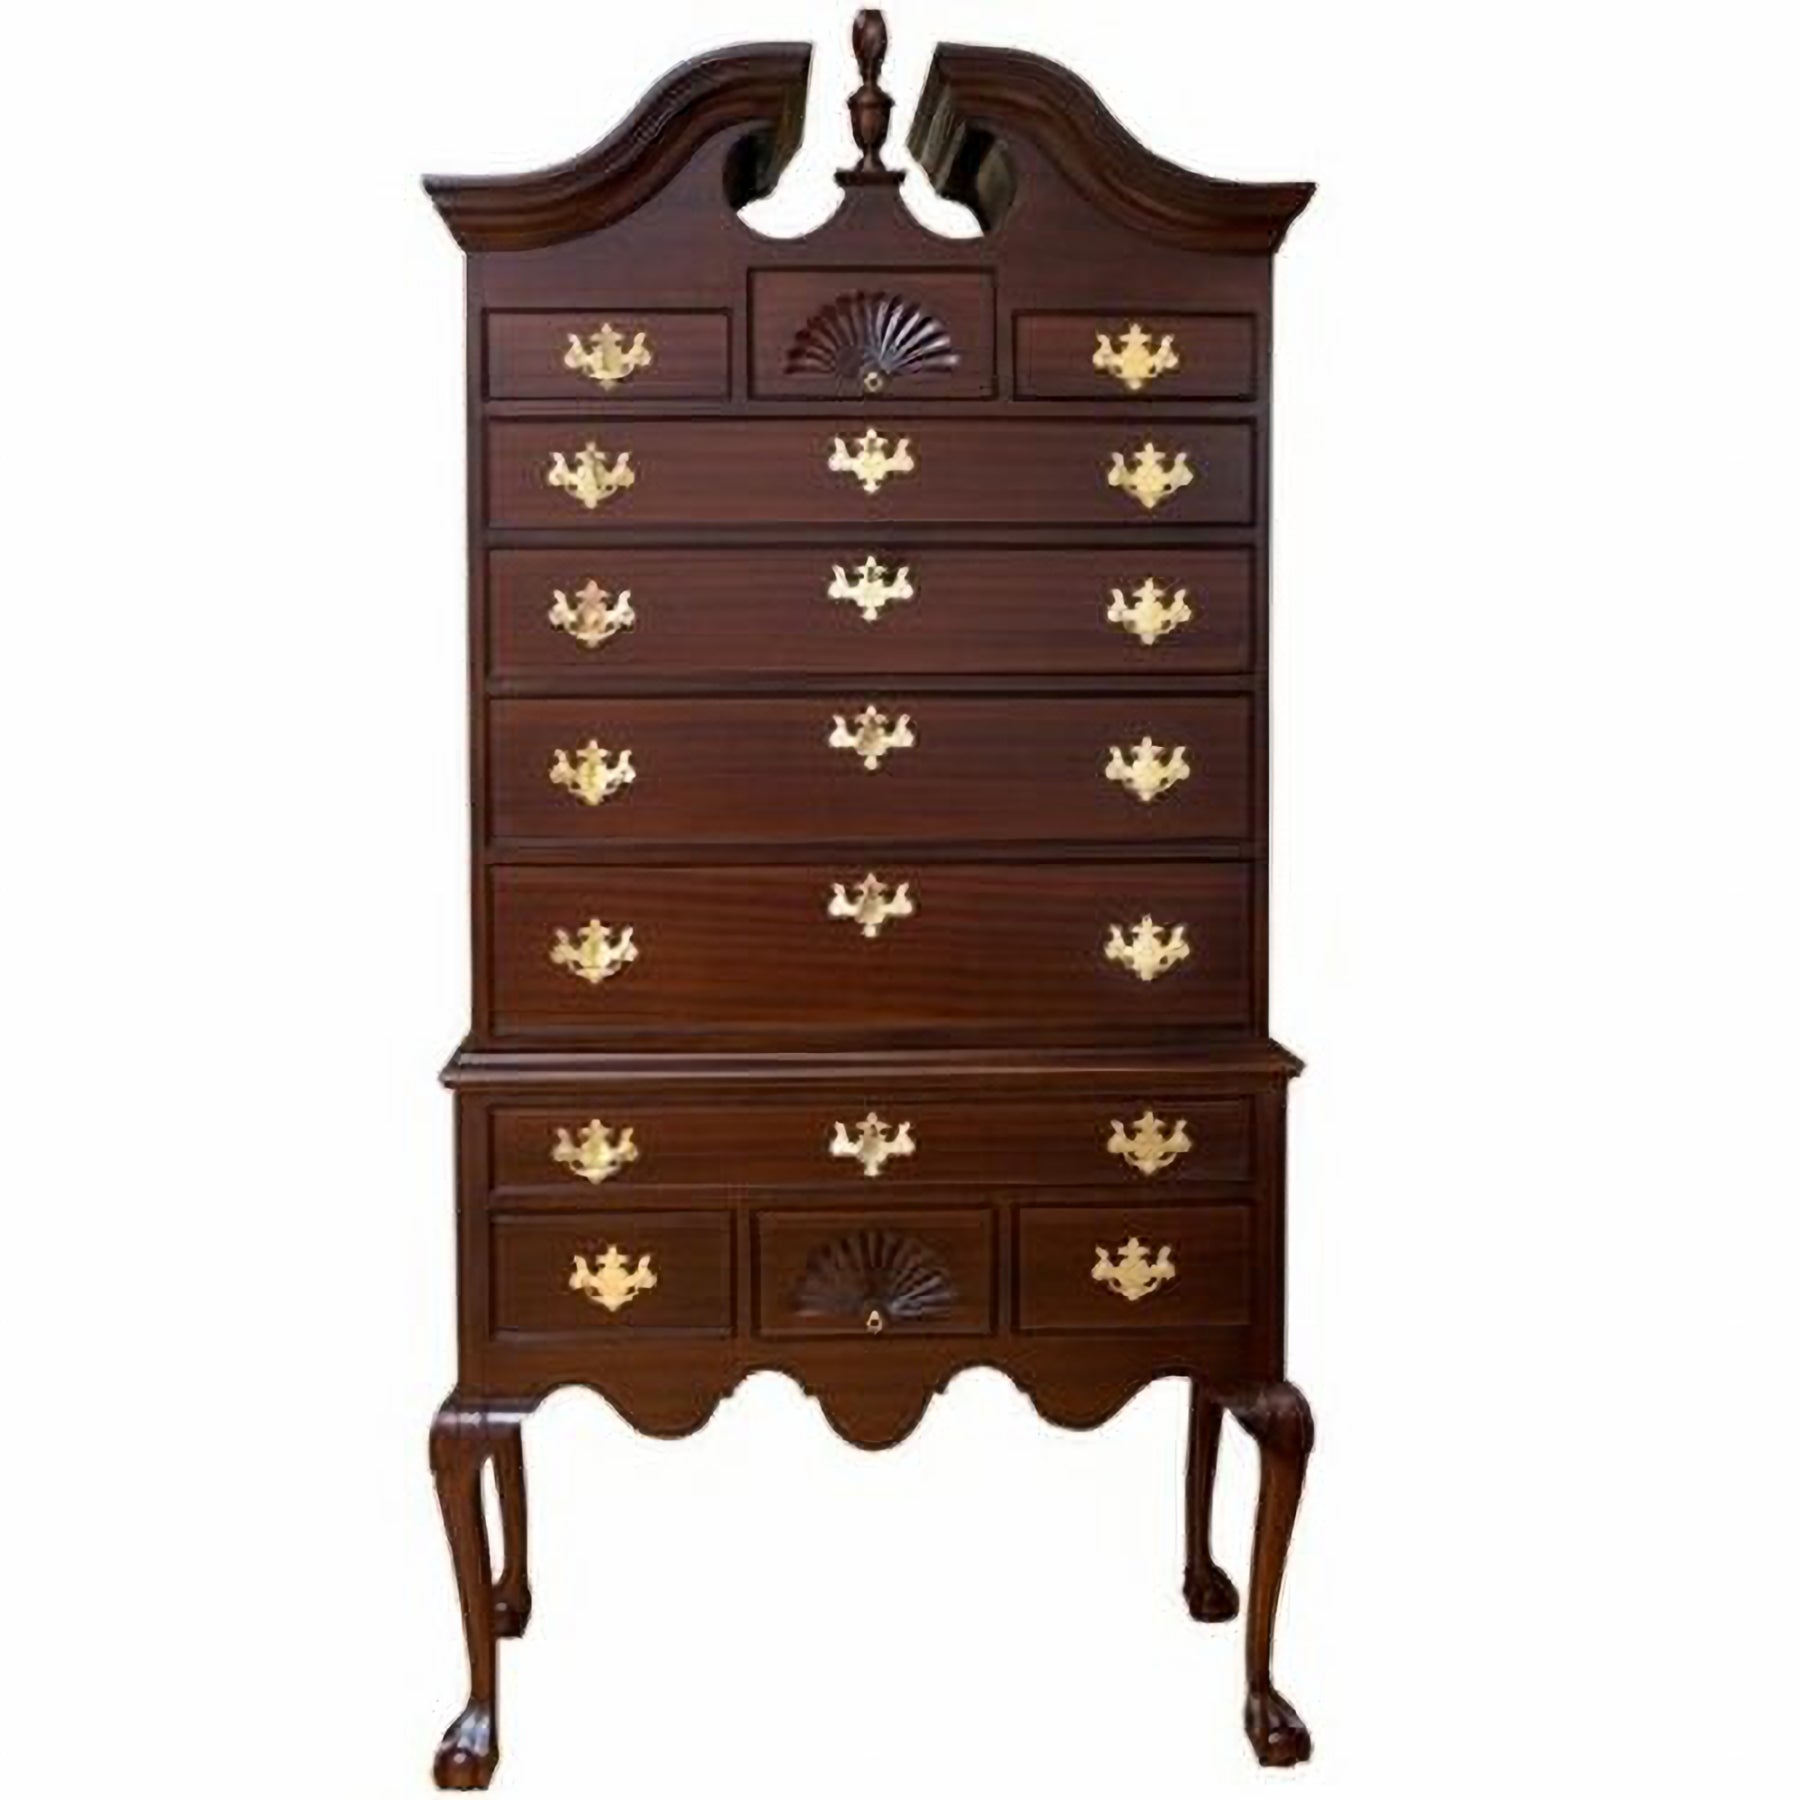 Bruton Full Bonnet Highboy - CW Collection